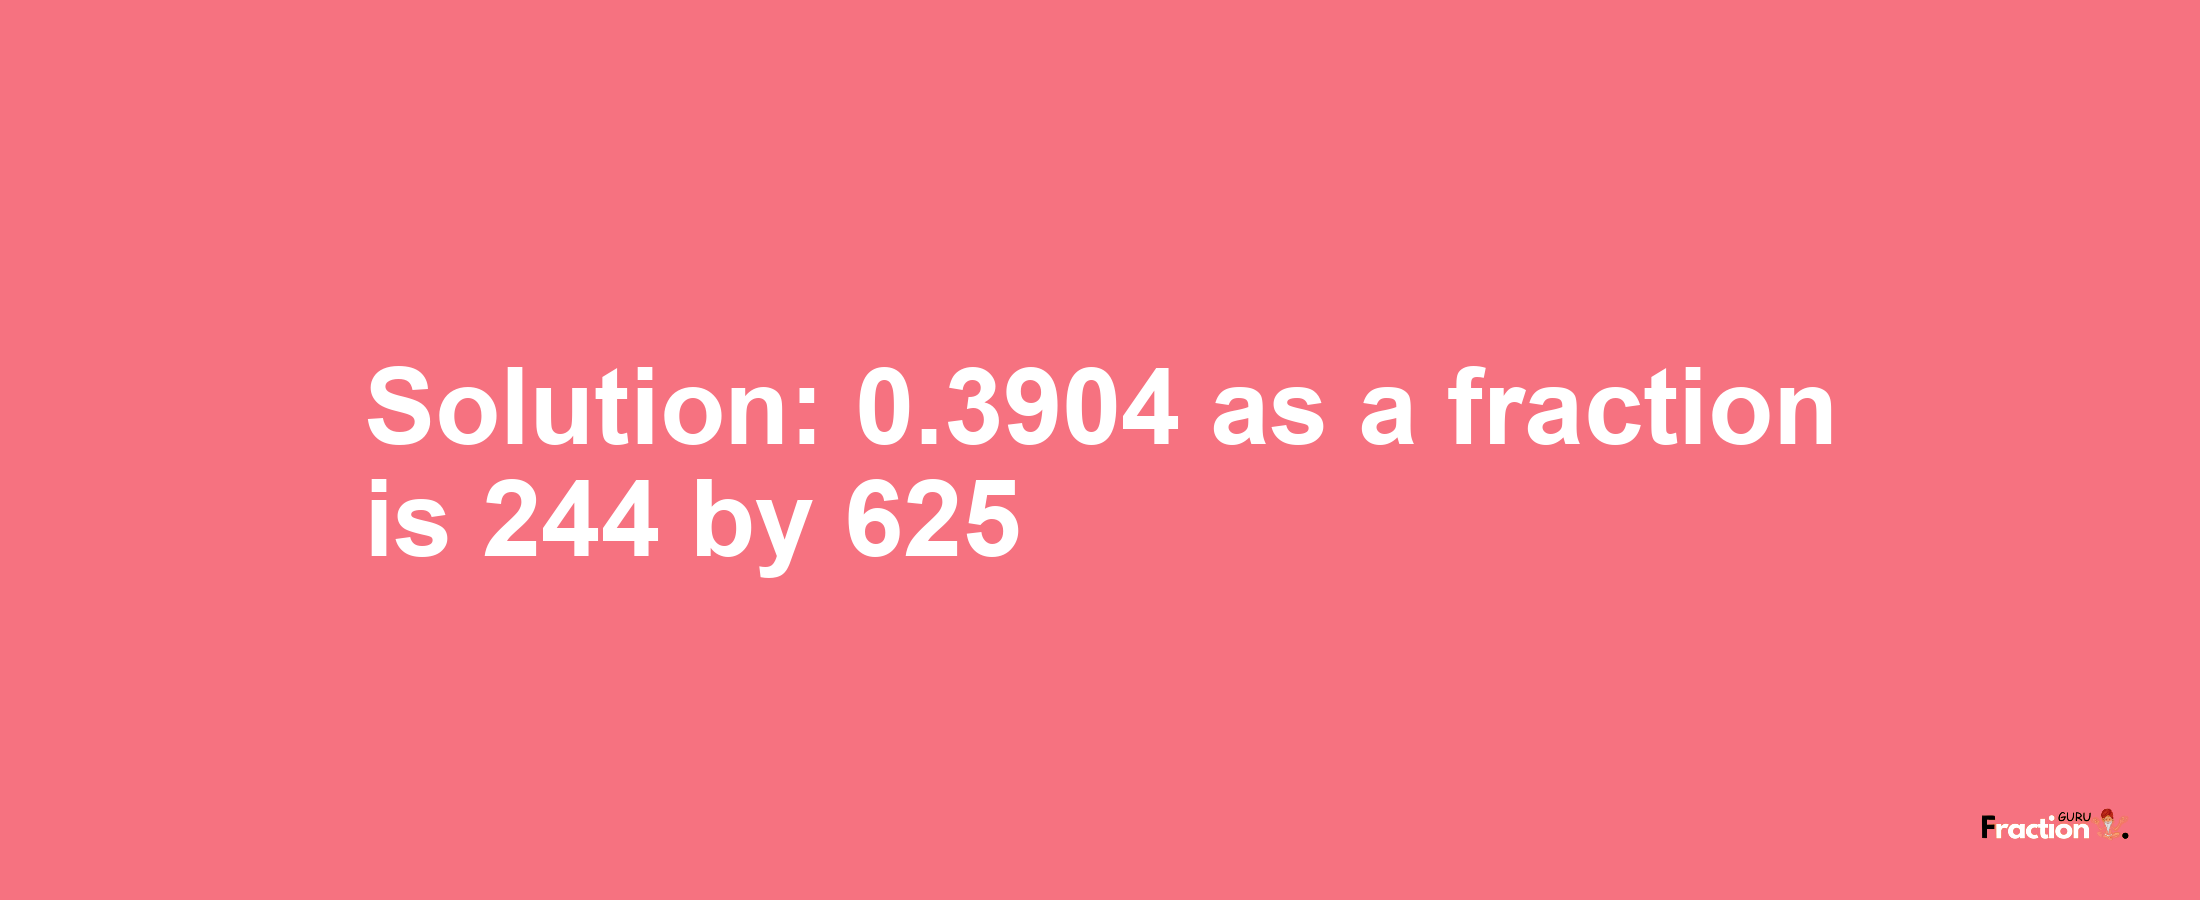 Solution:0.3904 as a fraction is 244/625